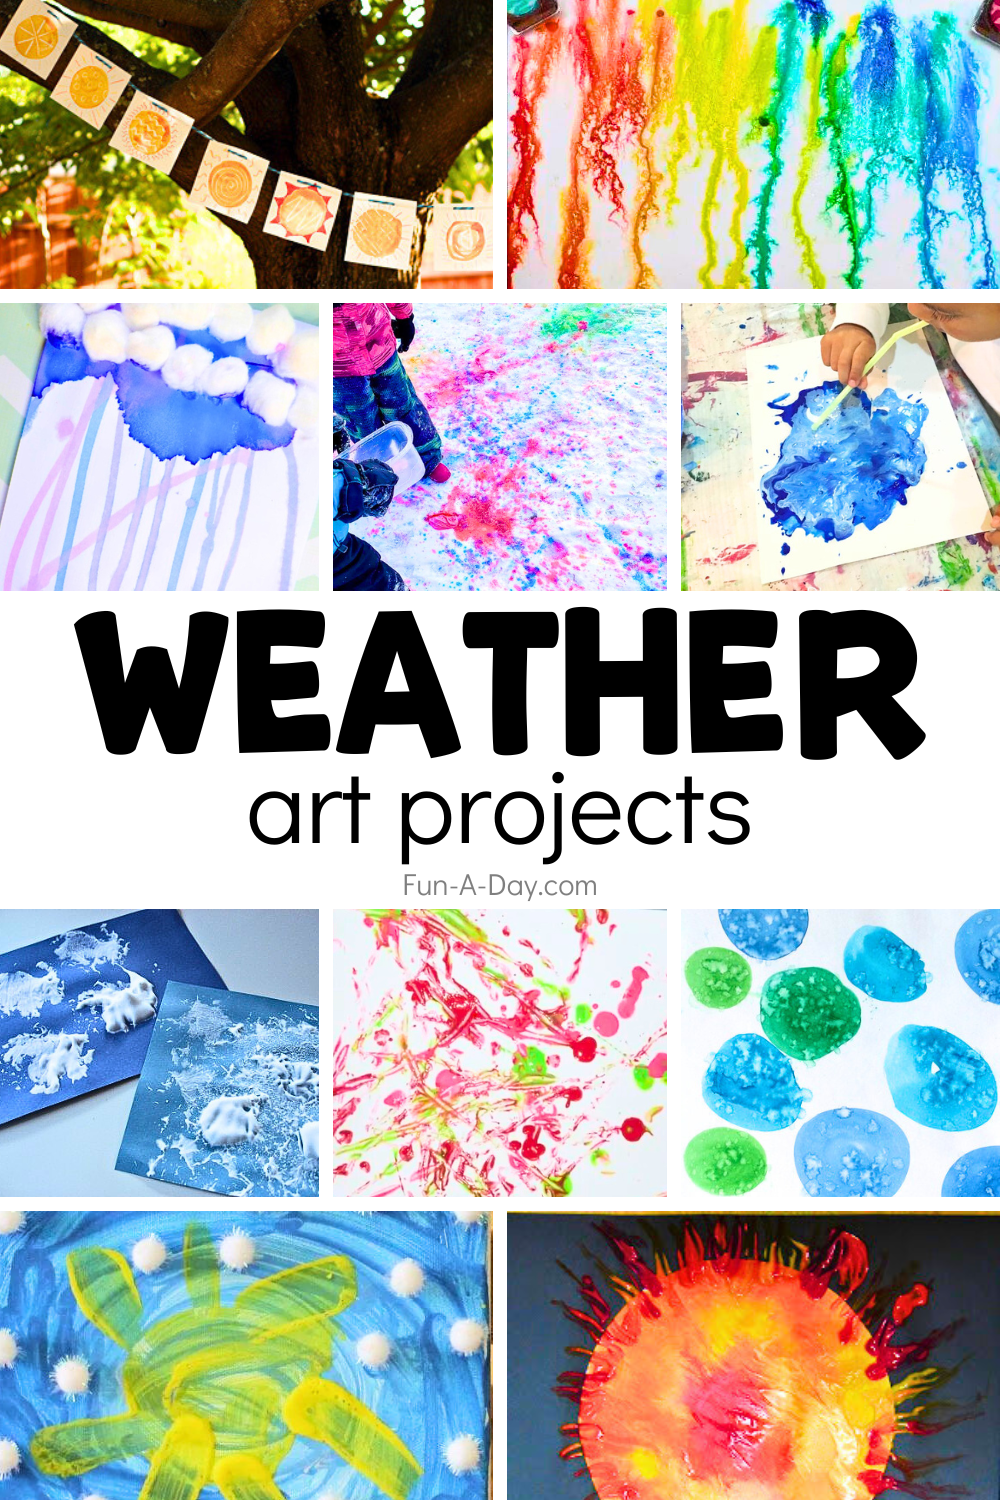 10 weather art project ideas with text that reads weather art projects.